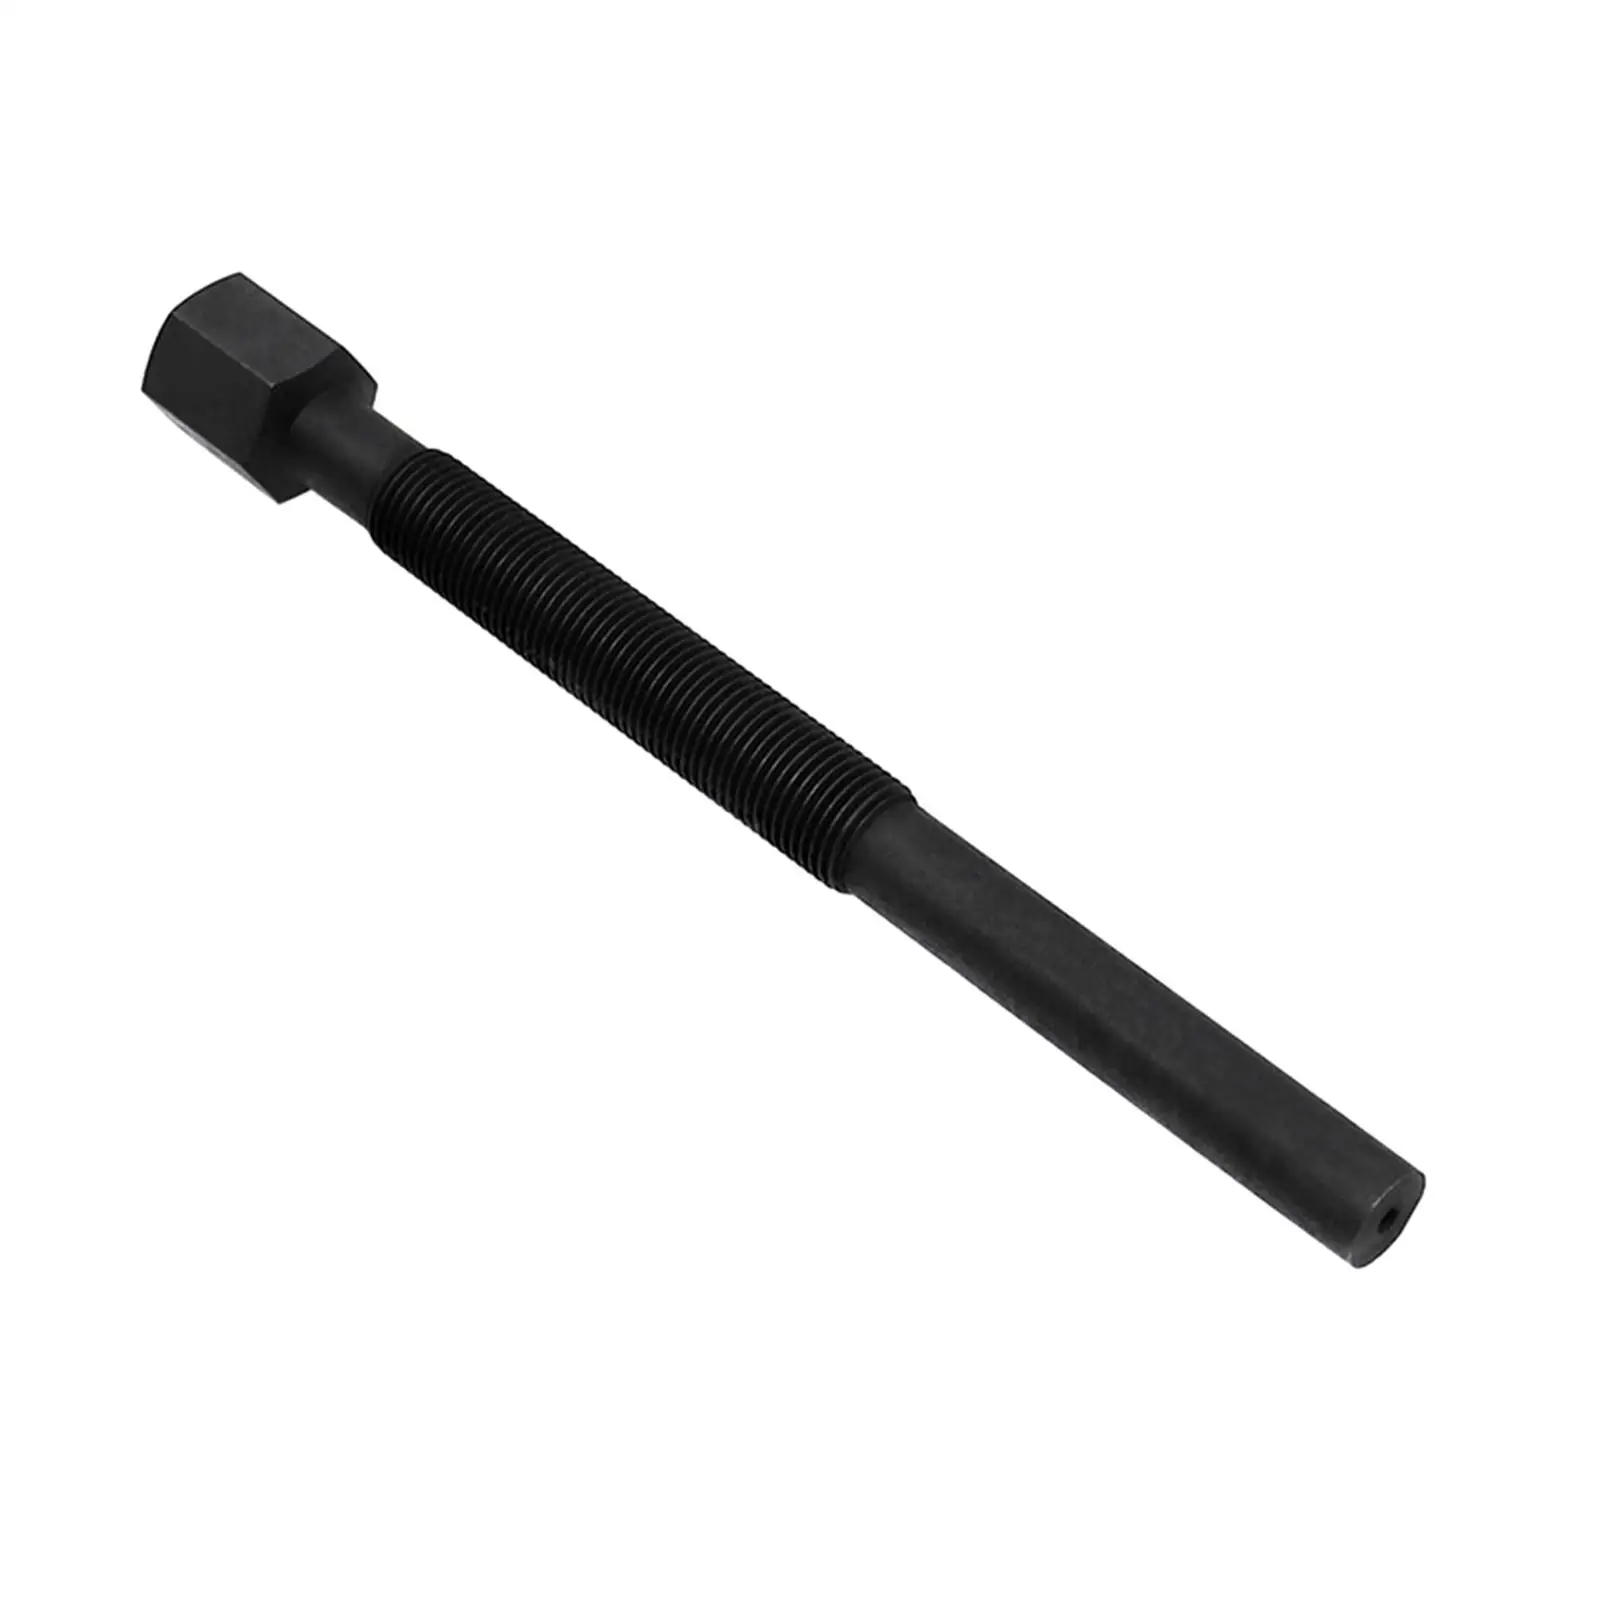 

Primary Drive Clutch Puller Remover Tool Black for John Deere 620i 850D